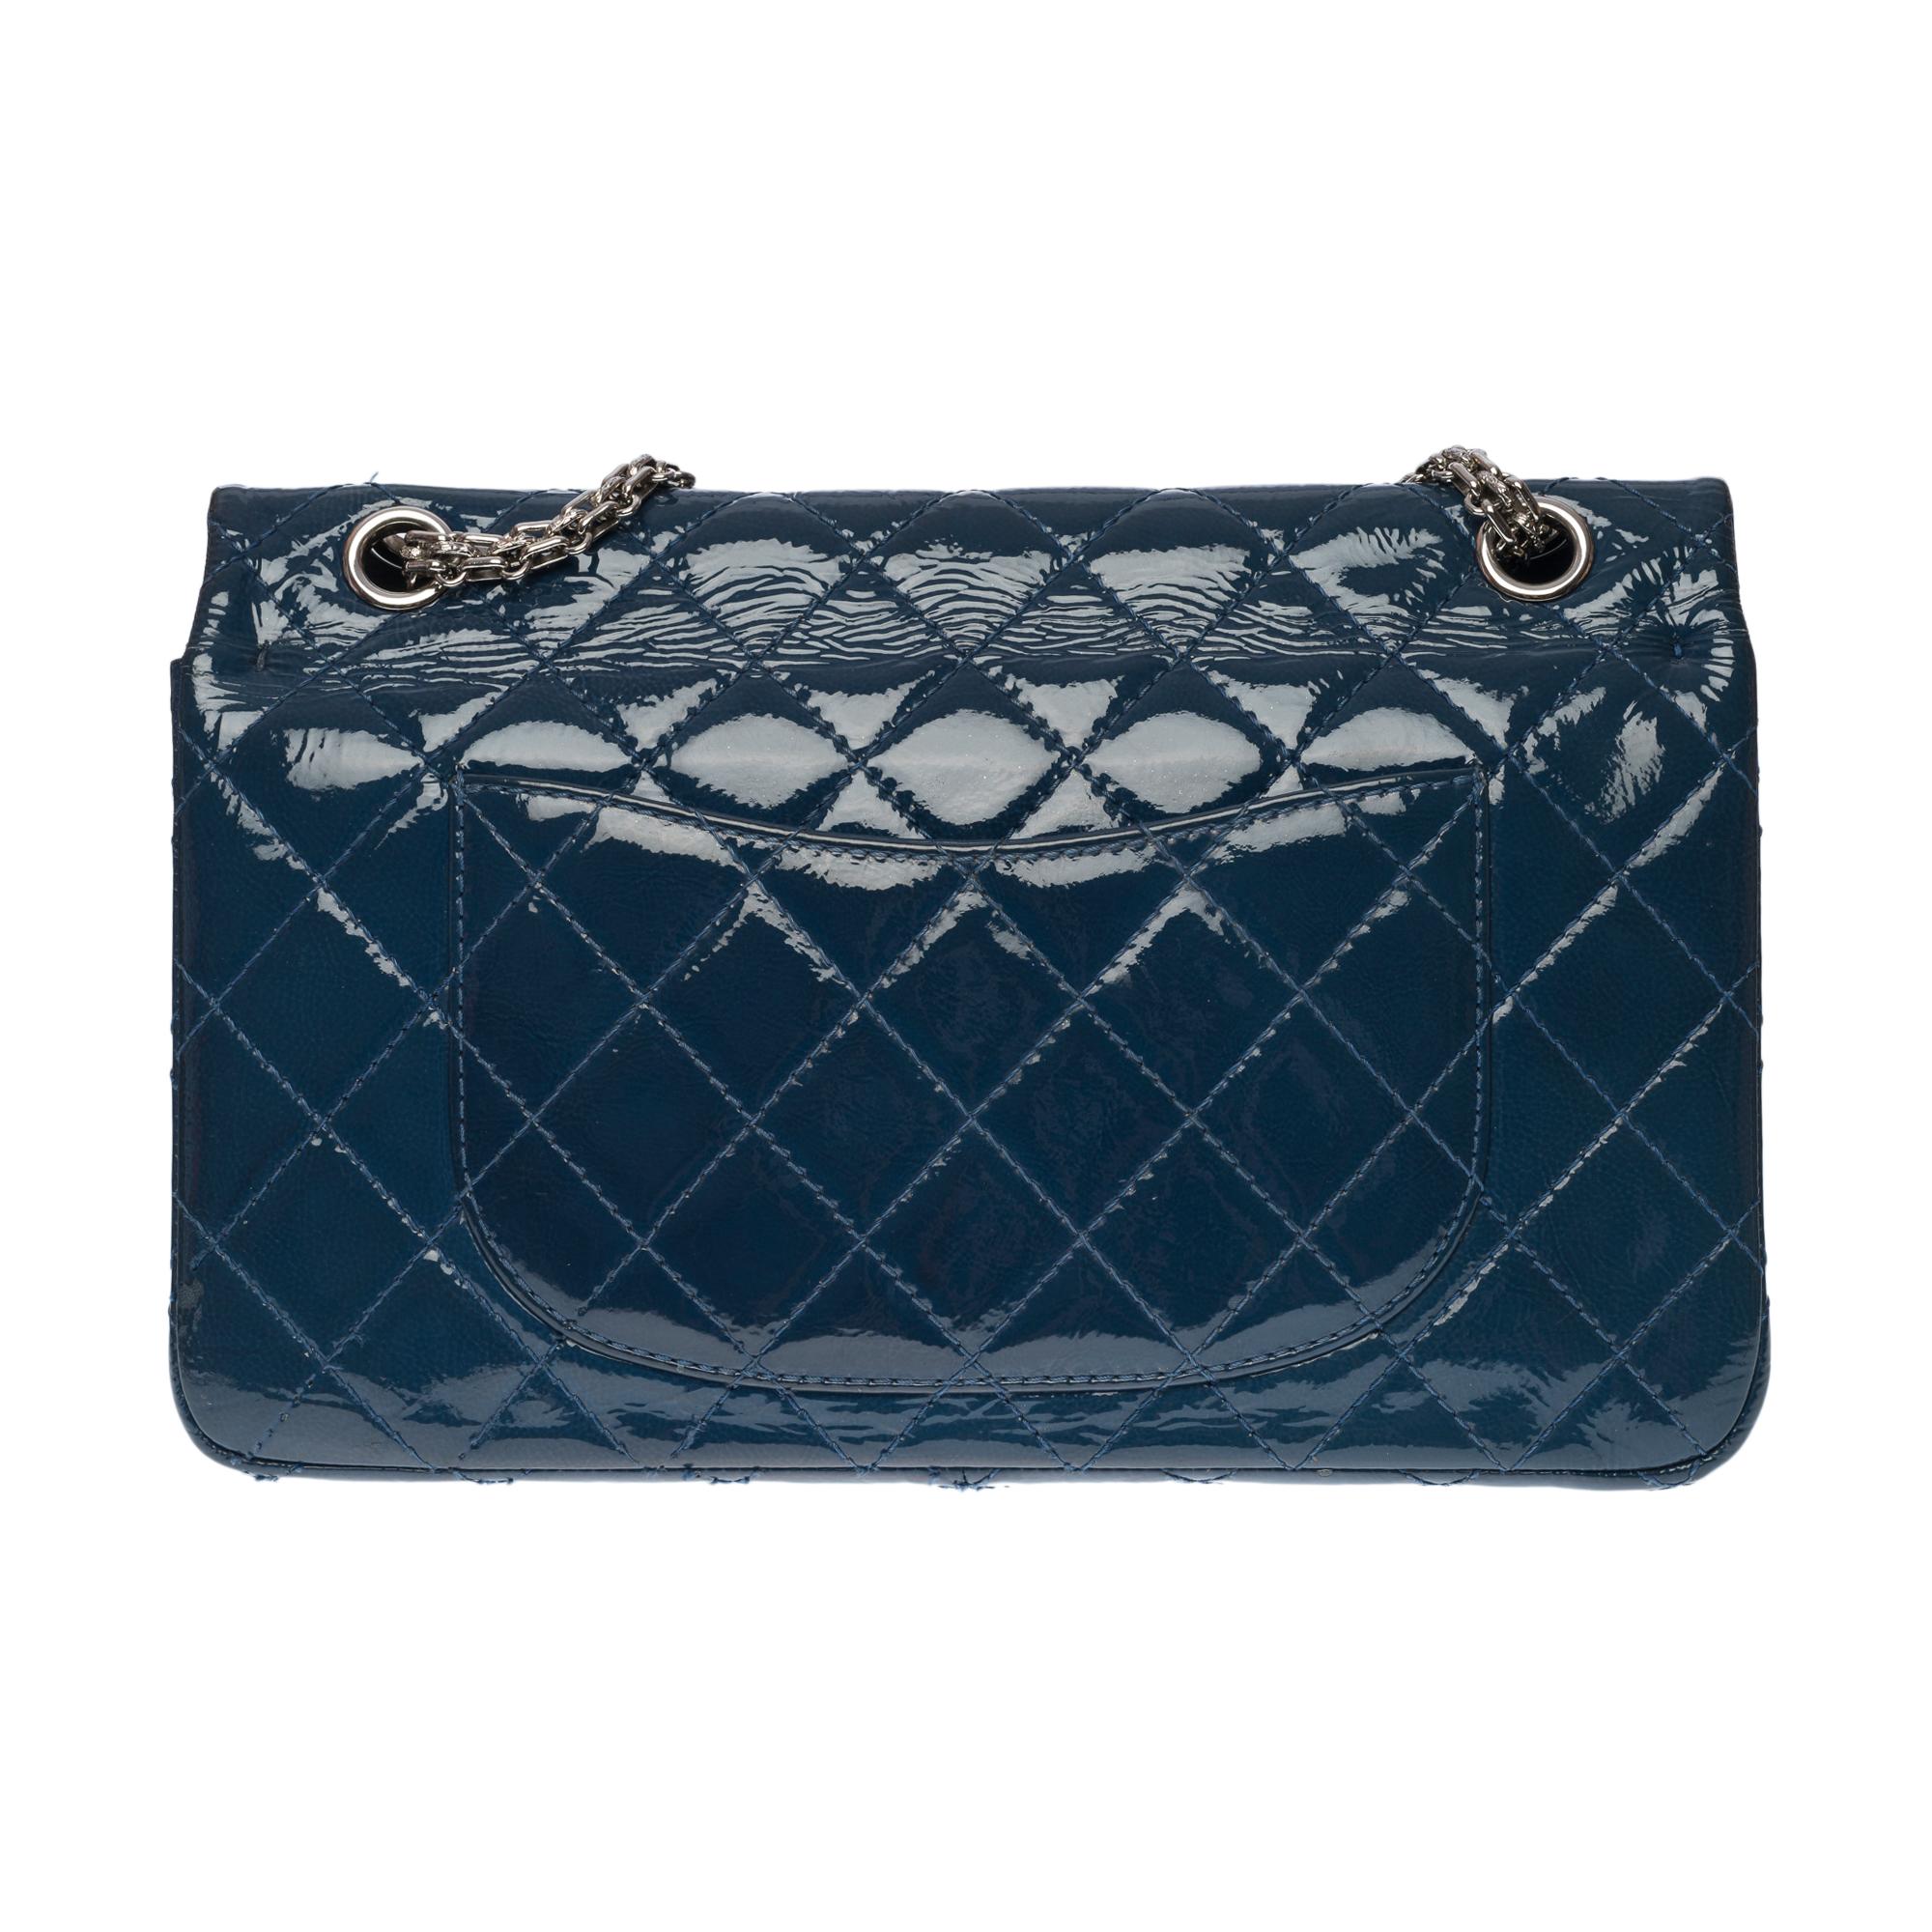 Splendid & Majestic Chanel Classic 2.55 double flap shoulder bag in blue patent quilted leather, silver metal hardware, a Mademoiselle chain handle in silver metal allowing a hand or shoulder or shoulder carry
 
Mademoiselle 2.55 closure in silver